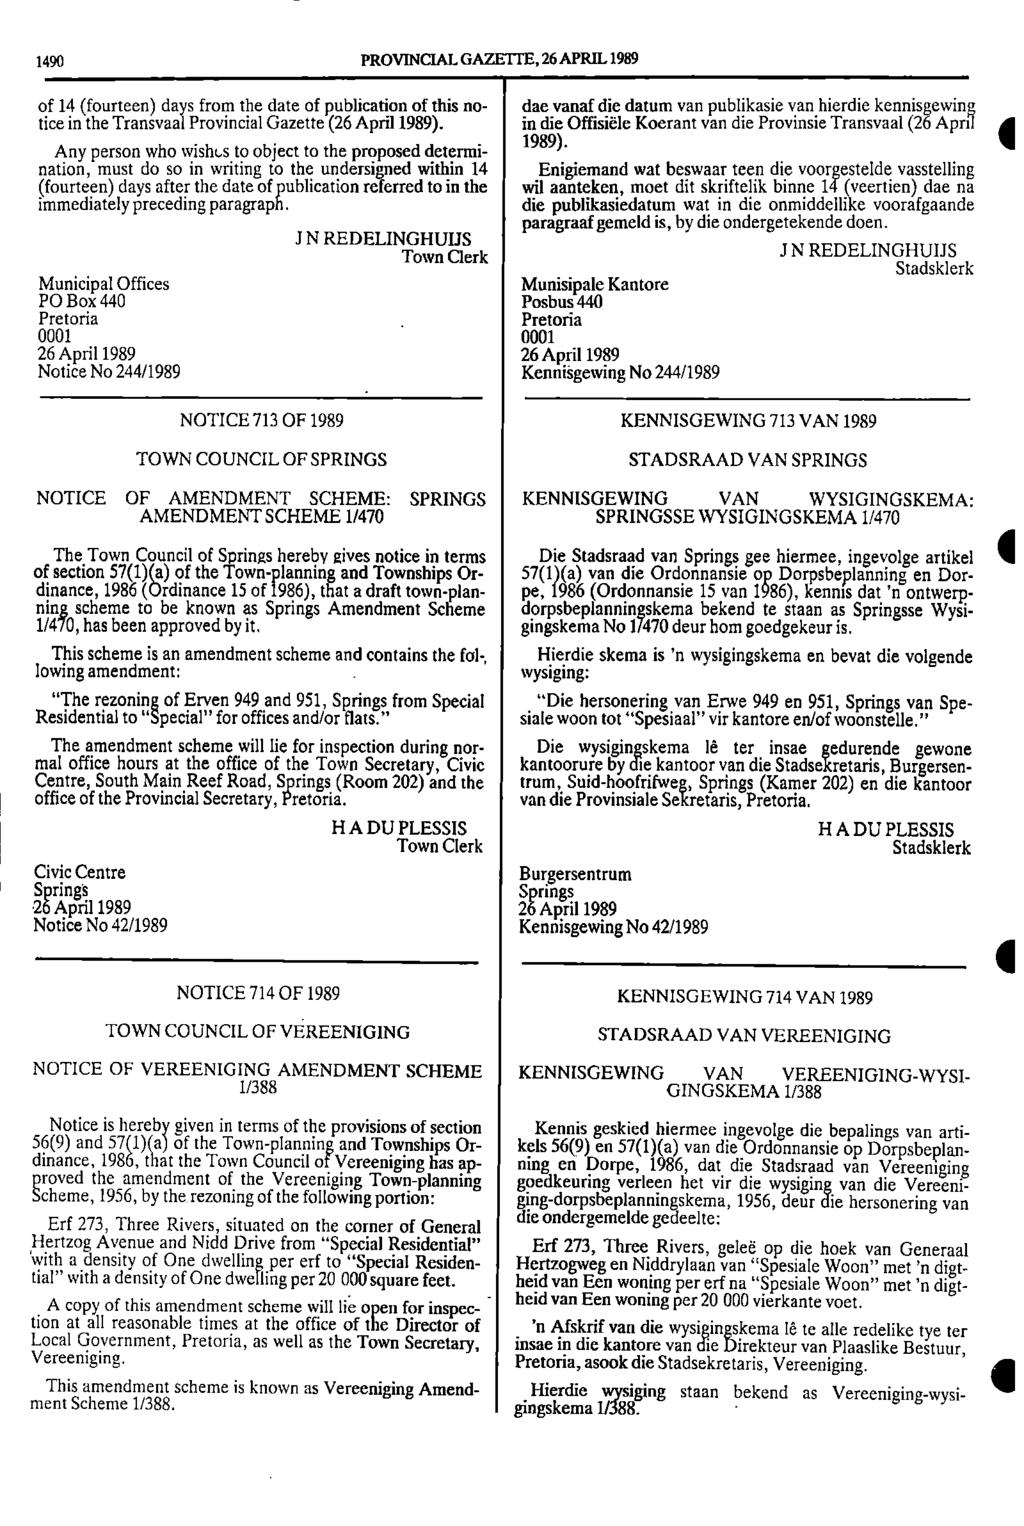 1490 PROVINCIAL GAZETTE, 26 APRIL 1989 of 14 (fourteen) days from the date of publication of this no tice in the Transvaal Provincial Gazette (26 April 1989) Any person who wishls to object to the